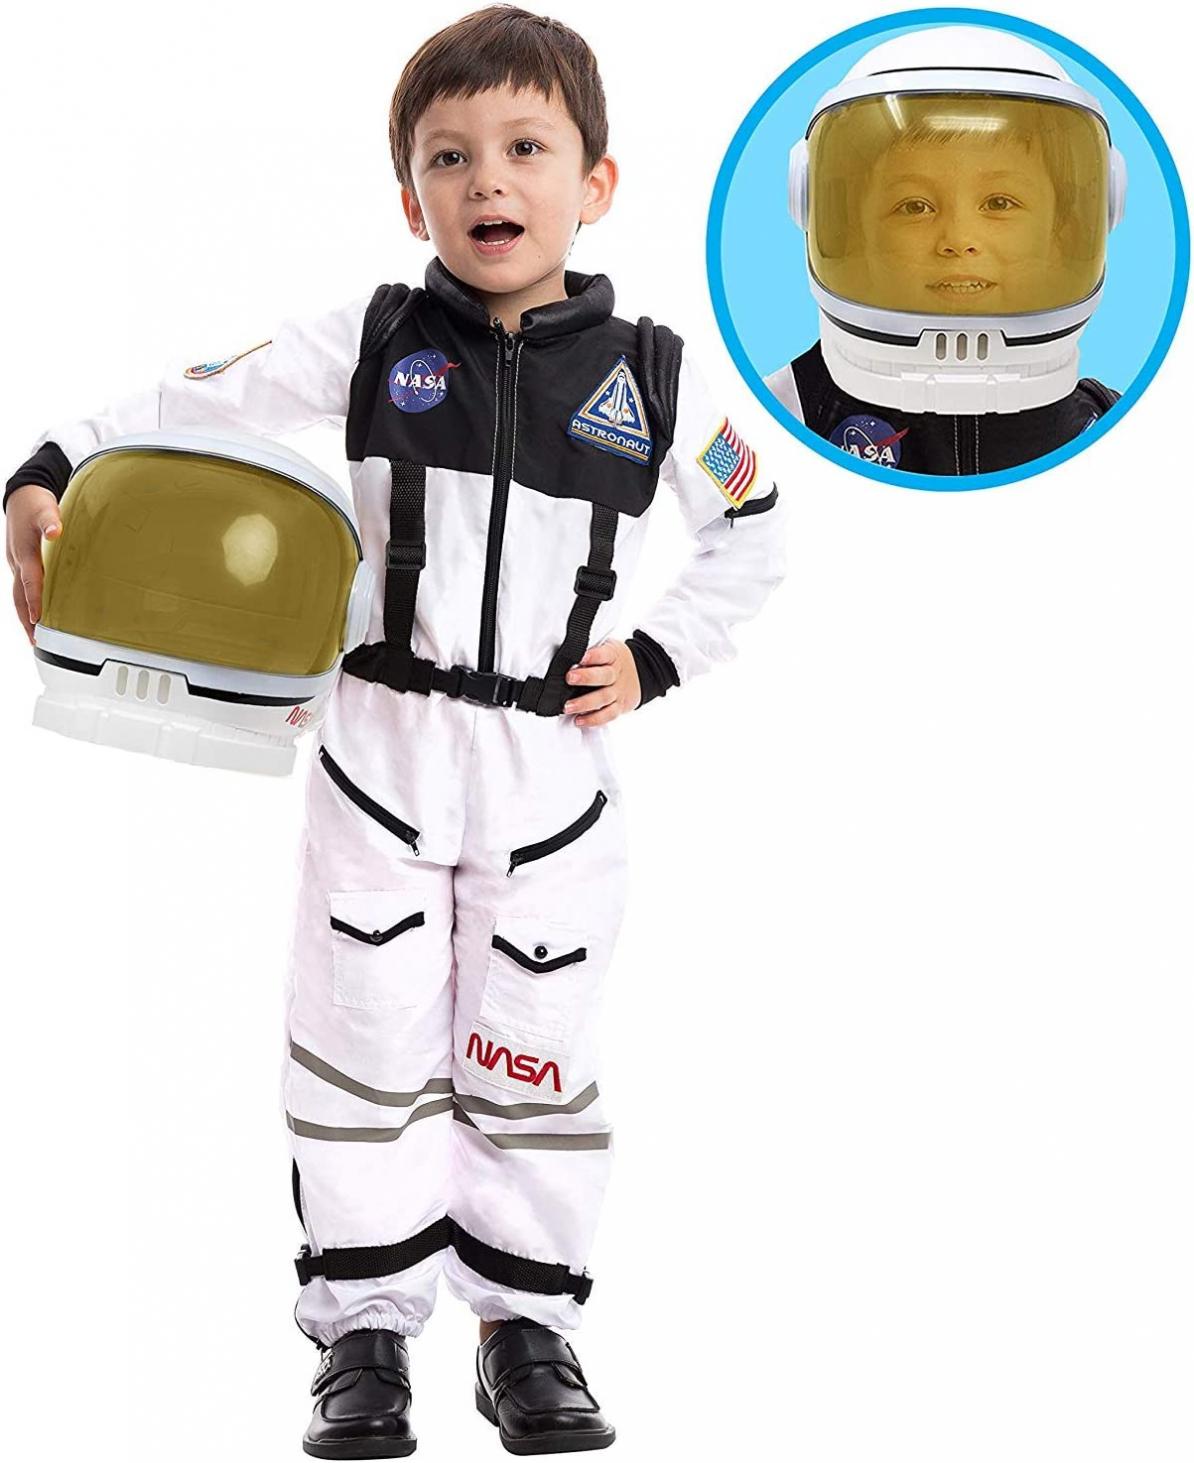 Astronaut Helmet with Movable Visor Pretend Play Toy Set for School Classroom Dress Up, Role Play Accessory, Stocking, Birthday Party Favor Supplies, Girls, Boys, Kids and Toddler White-3T